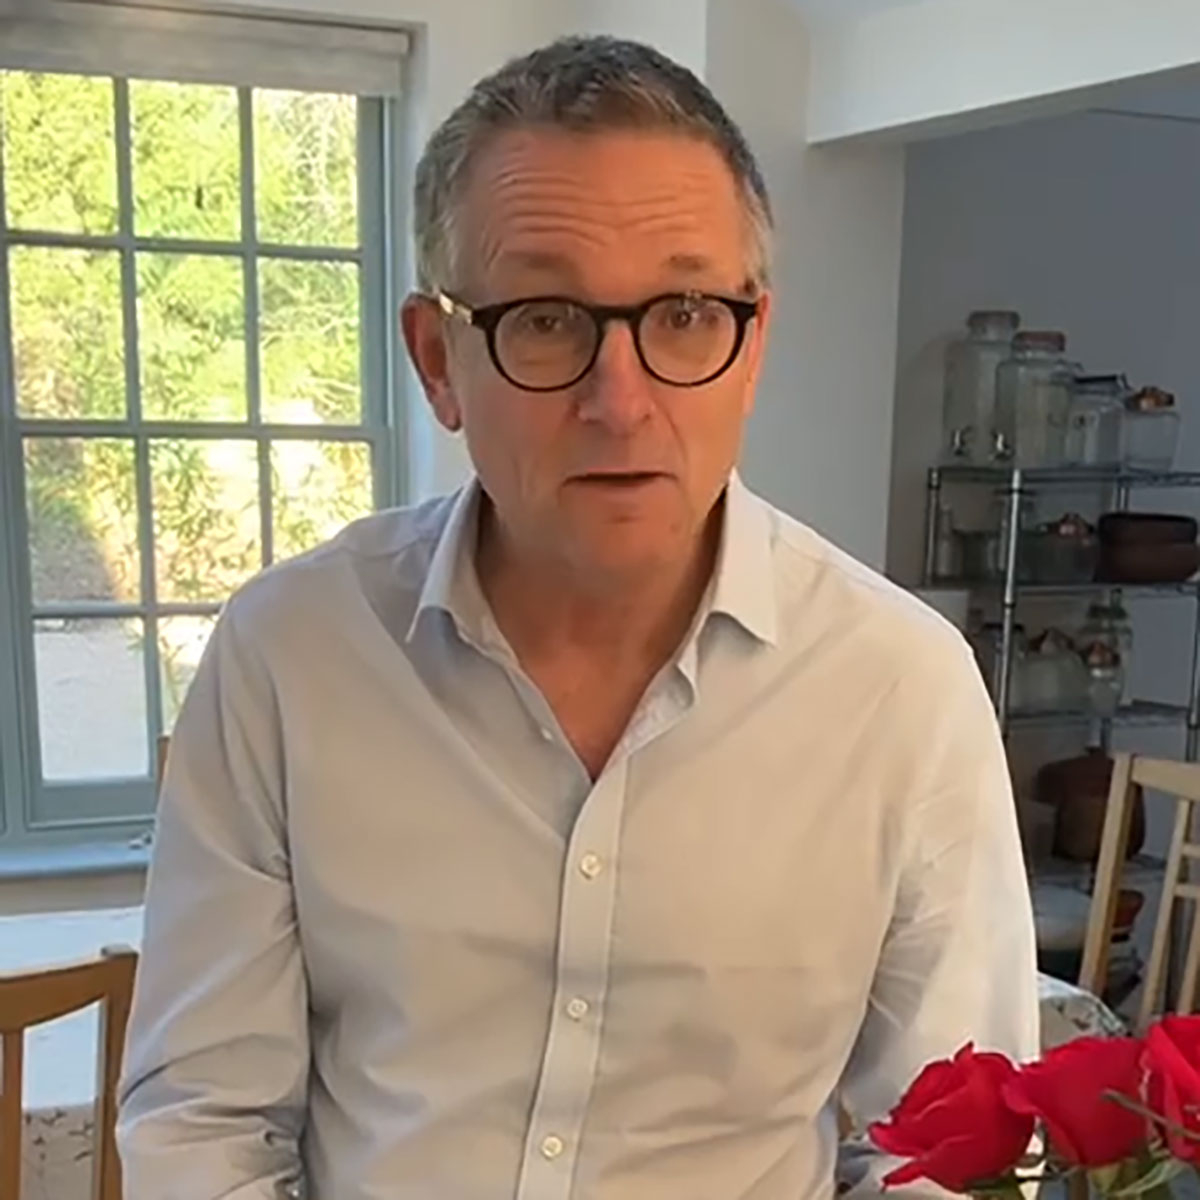 BBC Presenter Dr. Michael Mosley’s Cause of Death Revealed